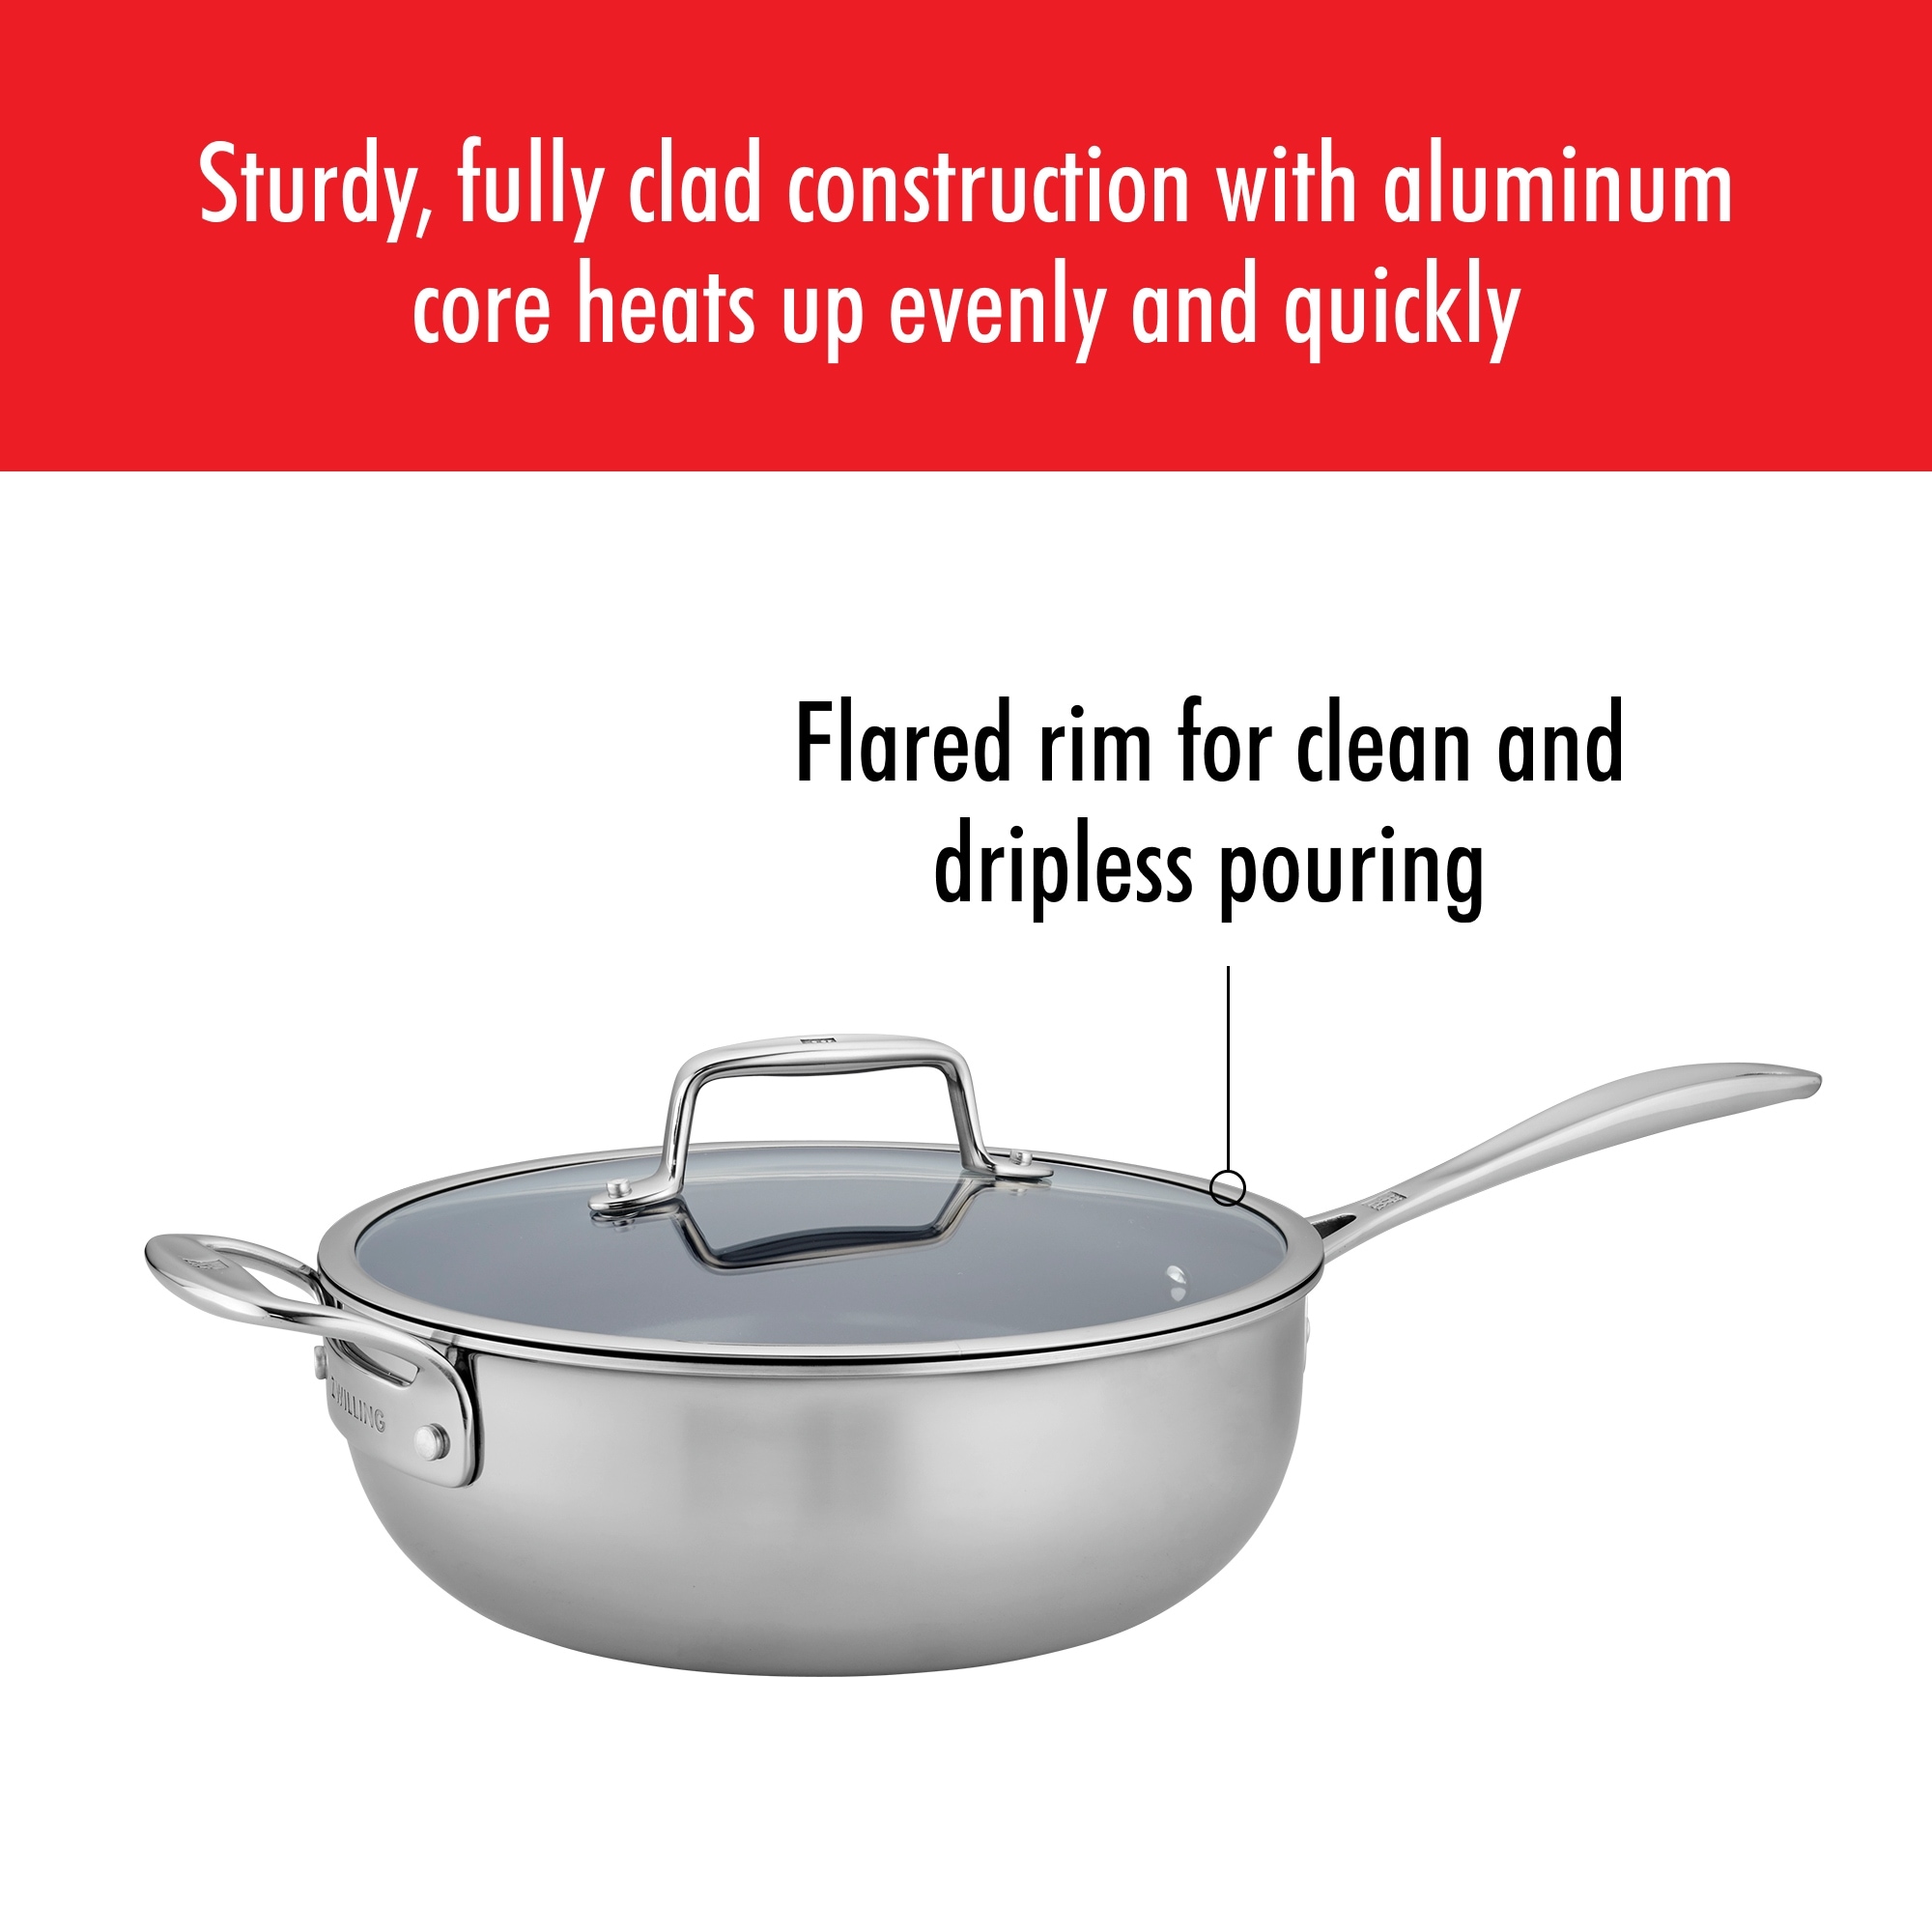 Zwilling Clad CFX 8 Stainless Steel Ceramic Nonstick Fry Pan